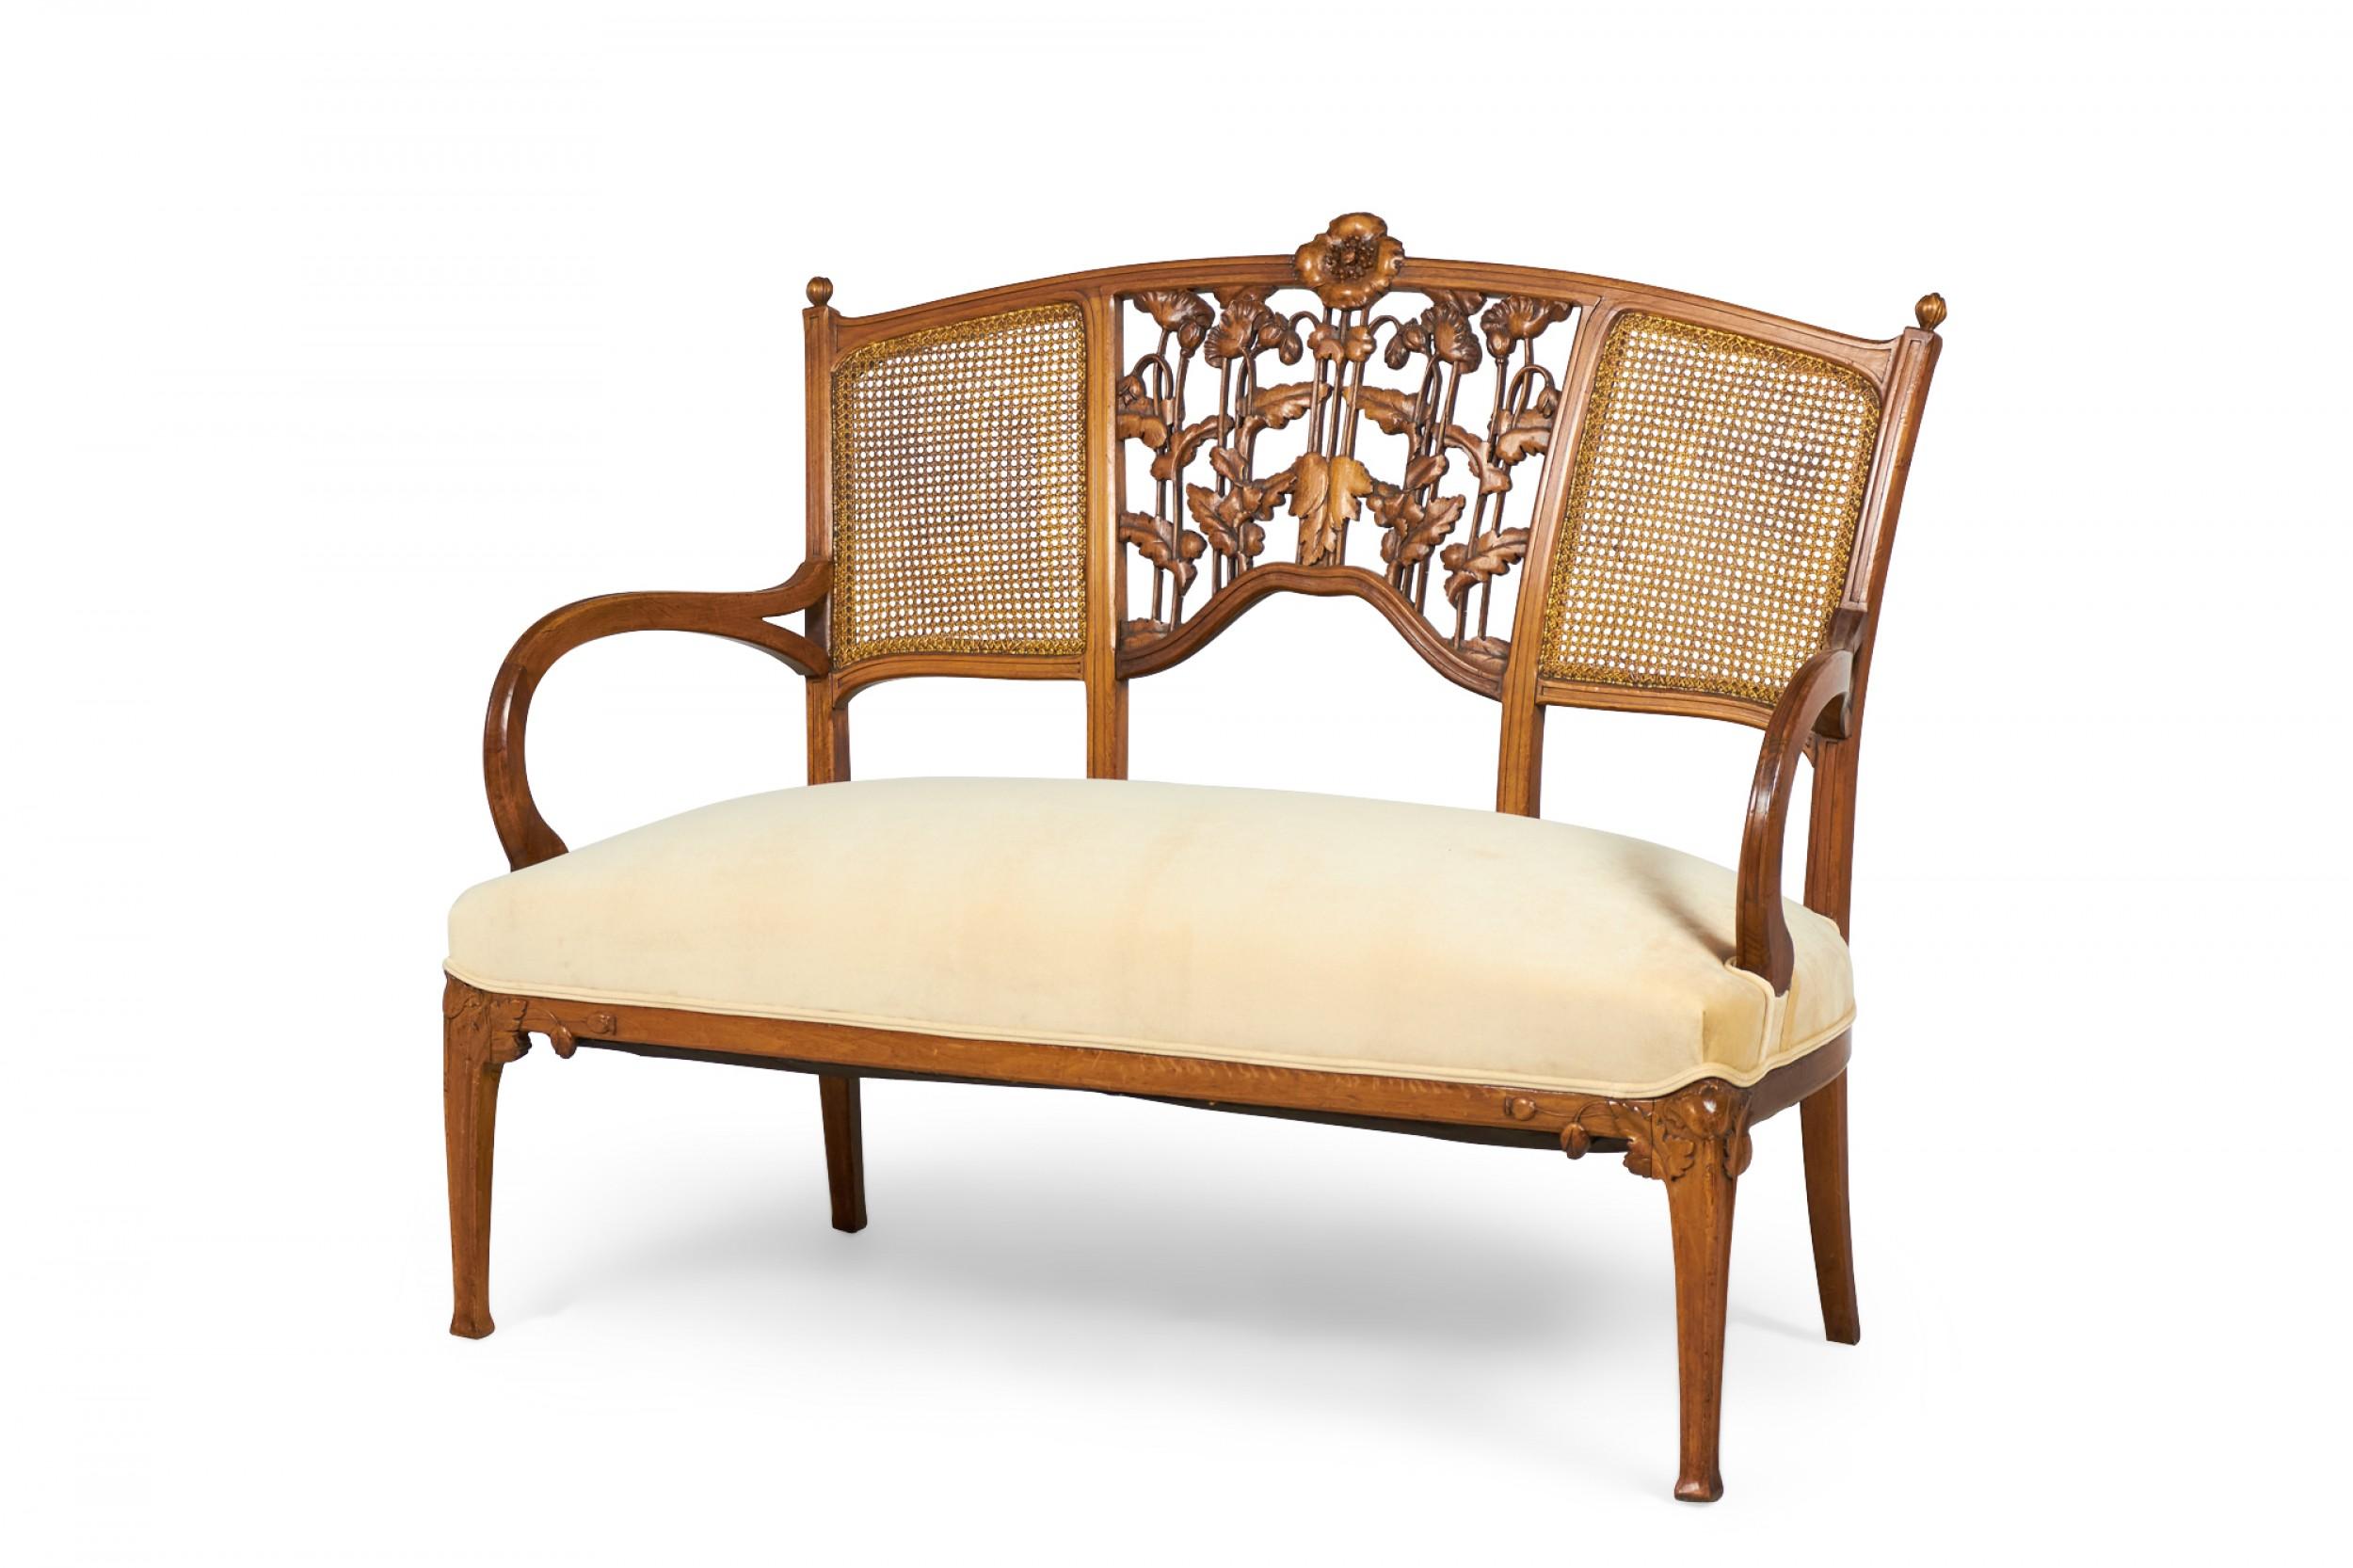 French Art Nouveau Walnut 5-Piece Living Room Set with Floral Filigree In Good Condition For Sale In New York, NY